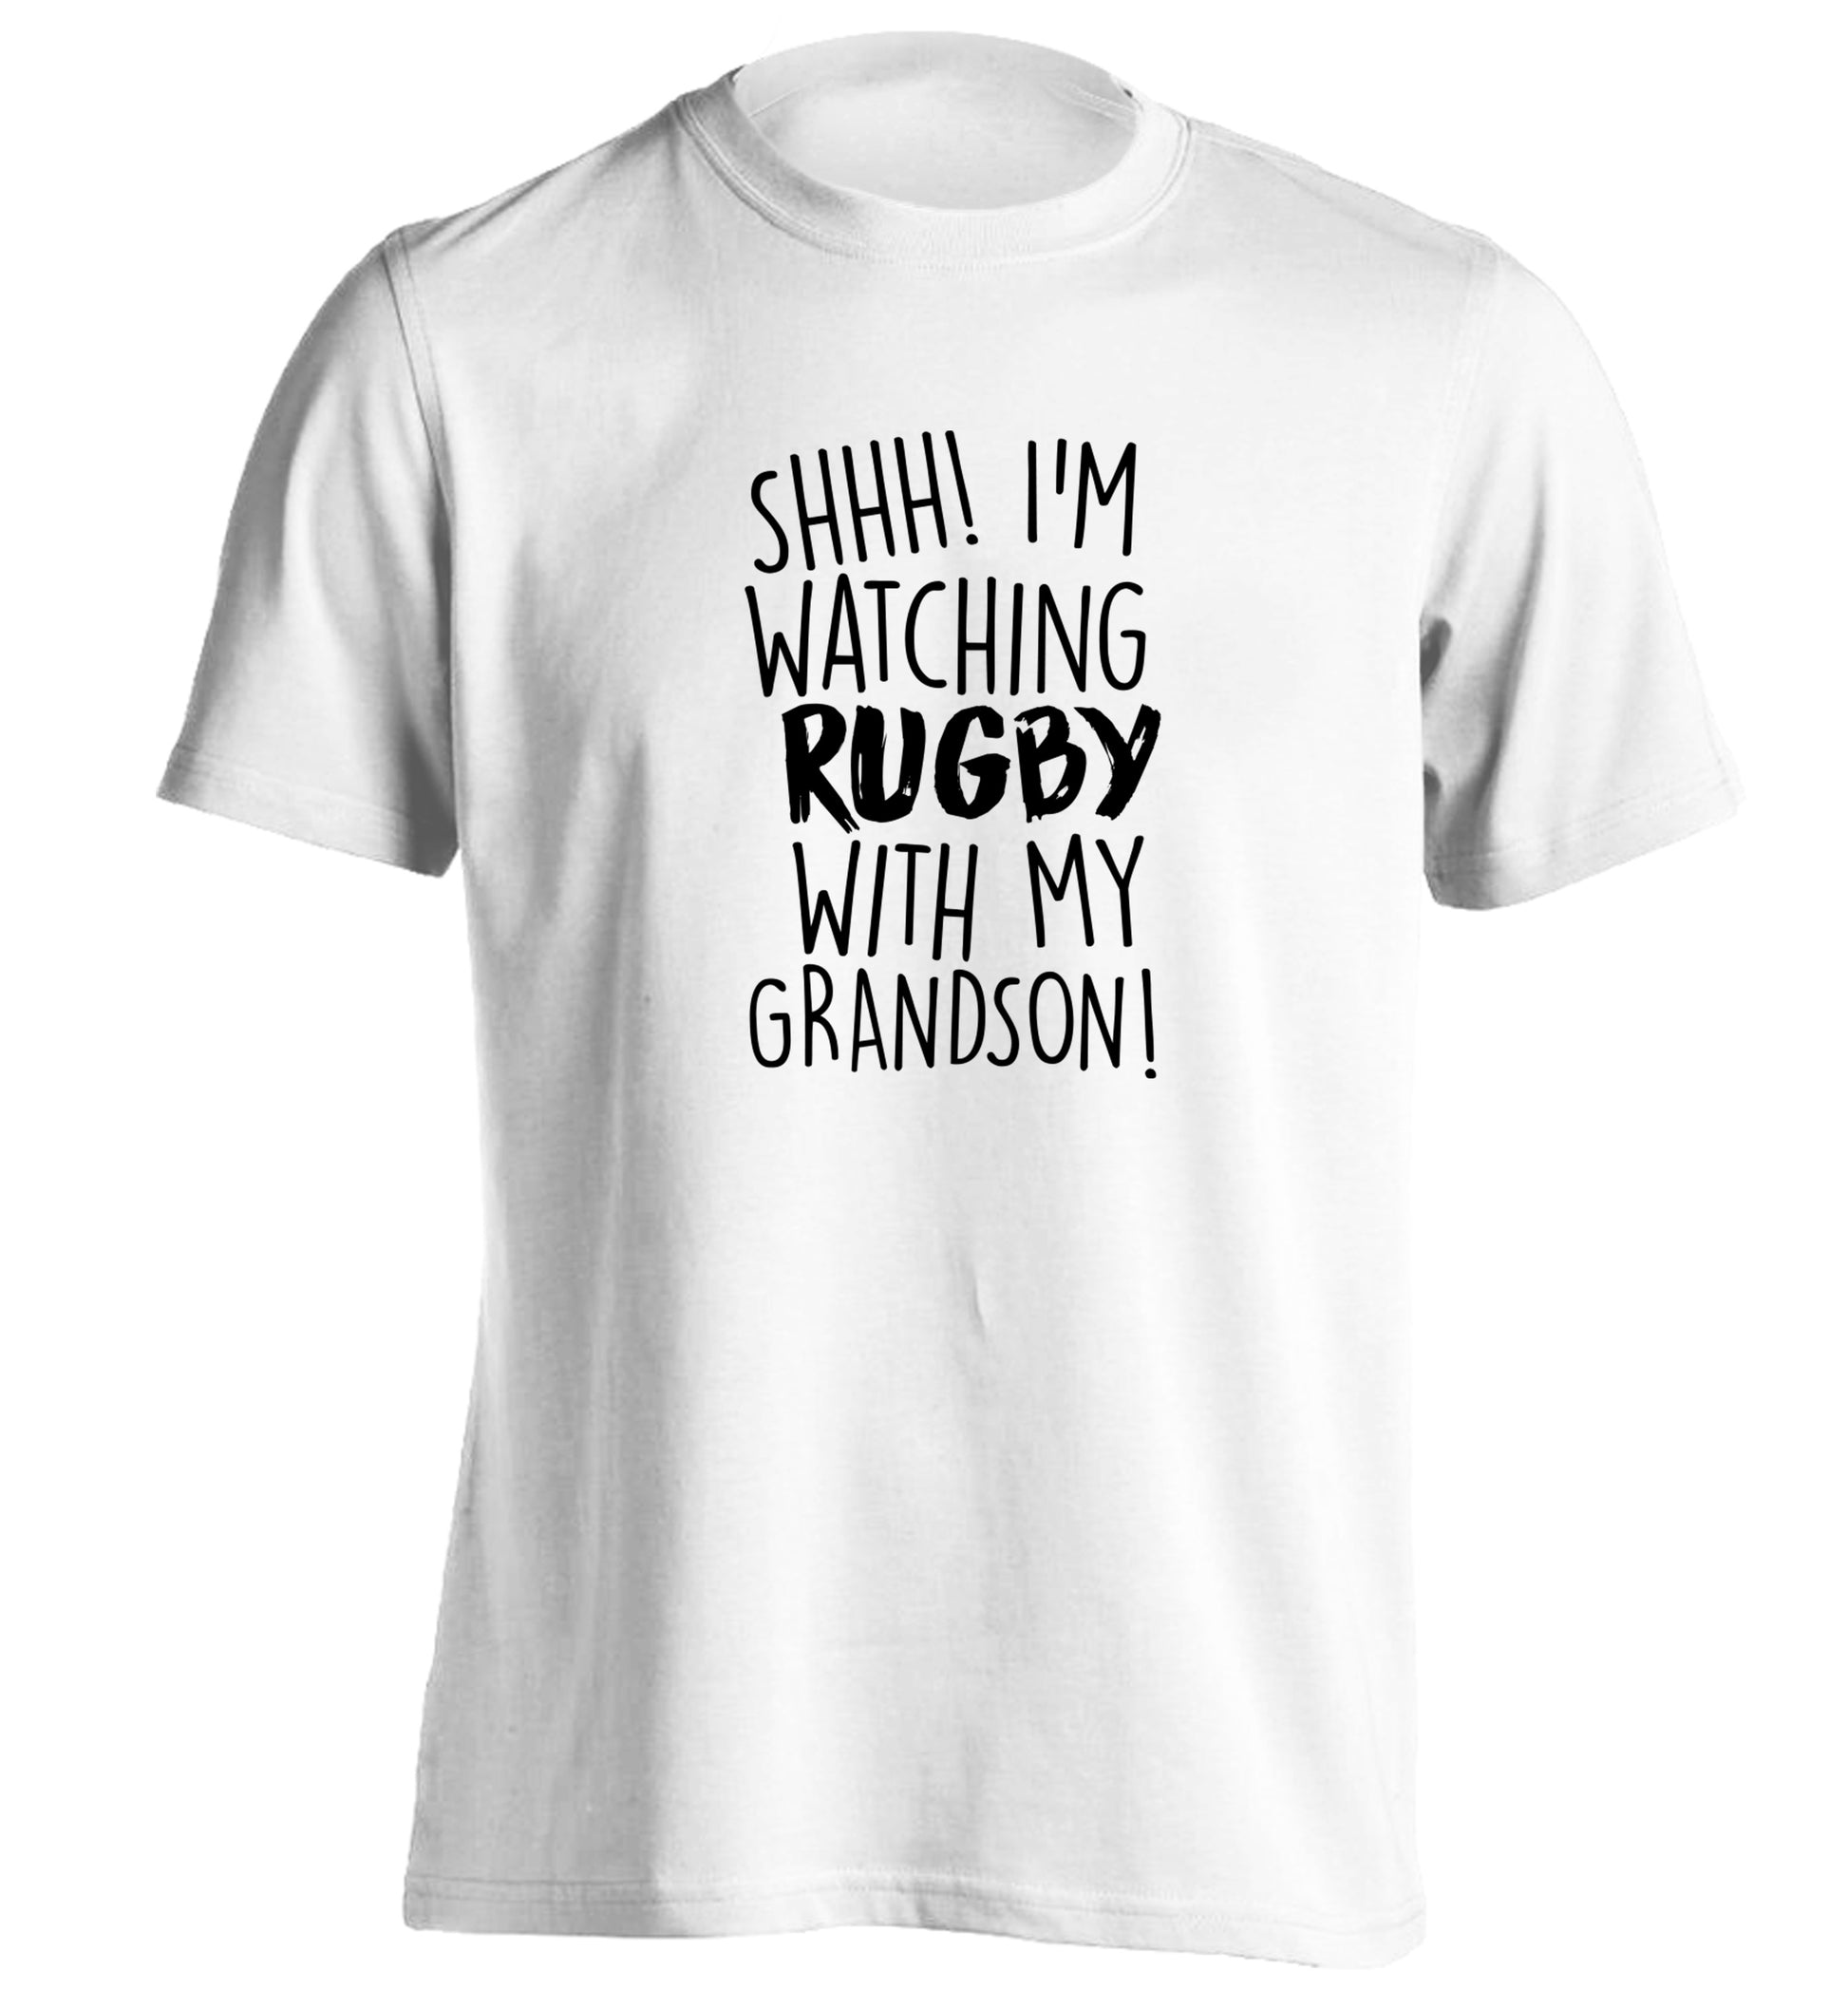 Shh I'm watching rugby with my grandson adults unisex white Tshirt 2XL